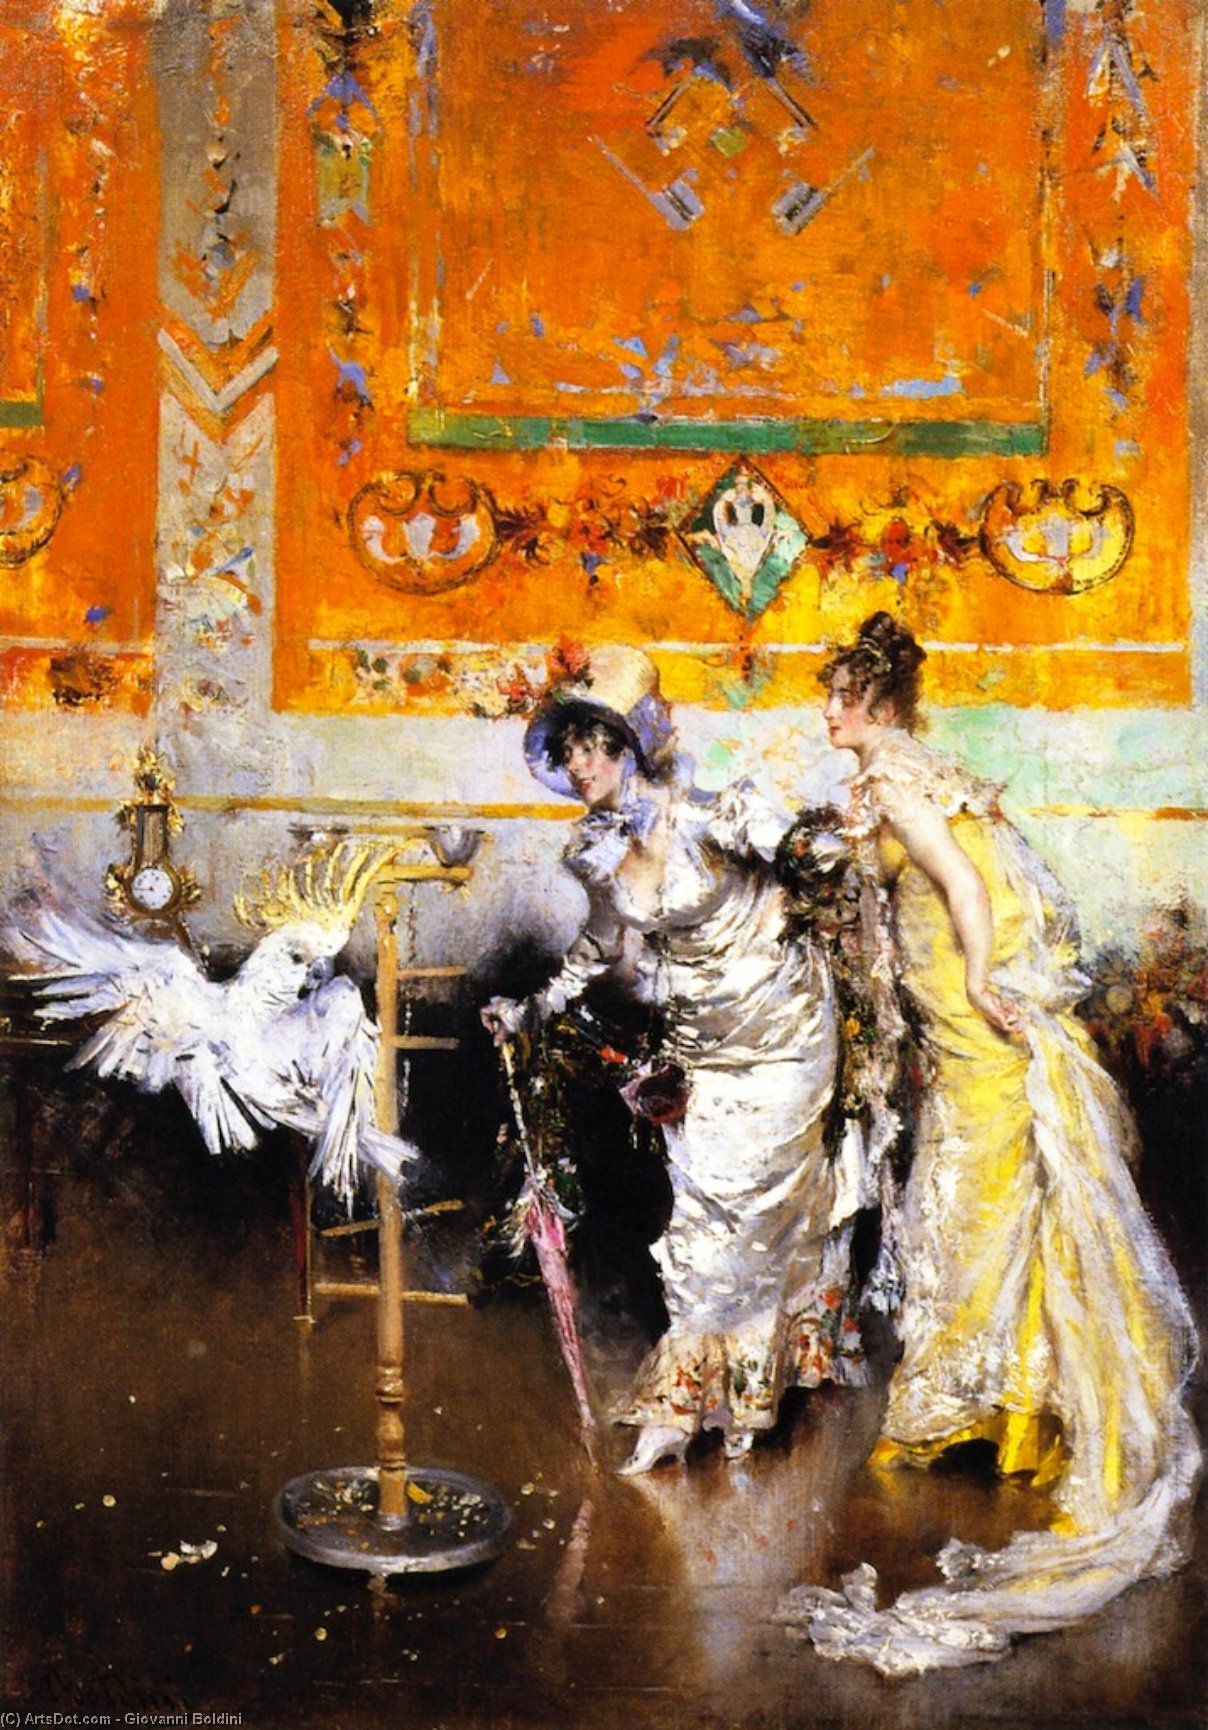 WikiOO.org - Encyclopedia of Fine Arts - Malba, Artwork Giovanni Boldini - Two Women with a Parrot (also known as Teasing the Parrot)